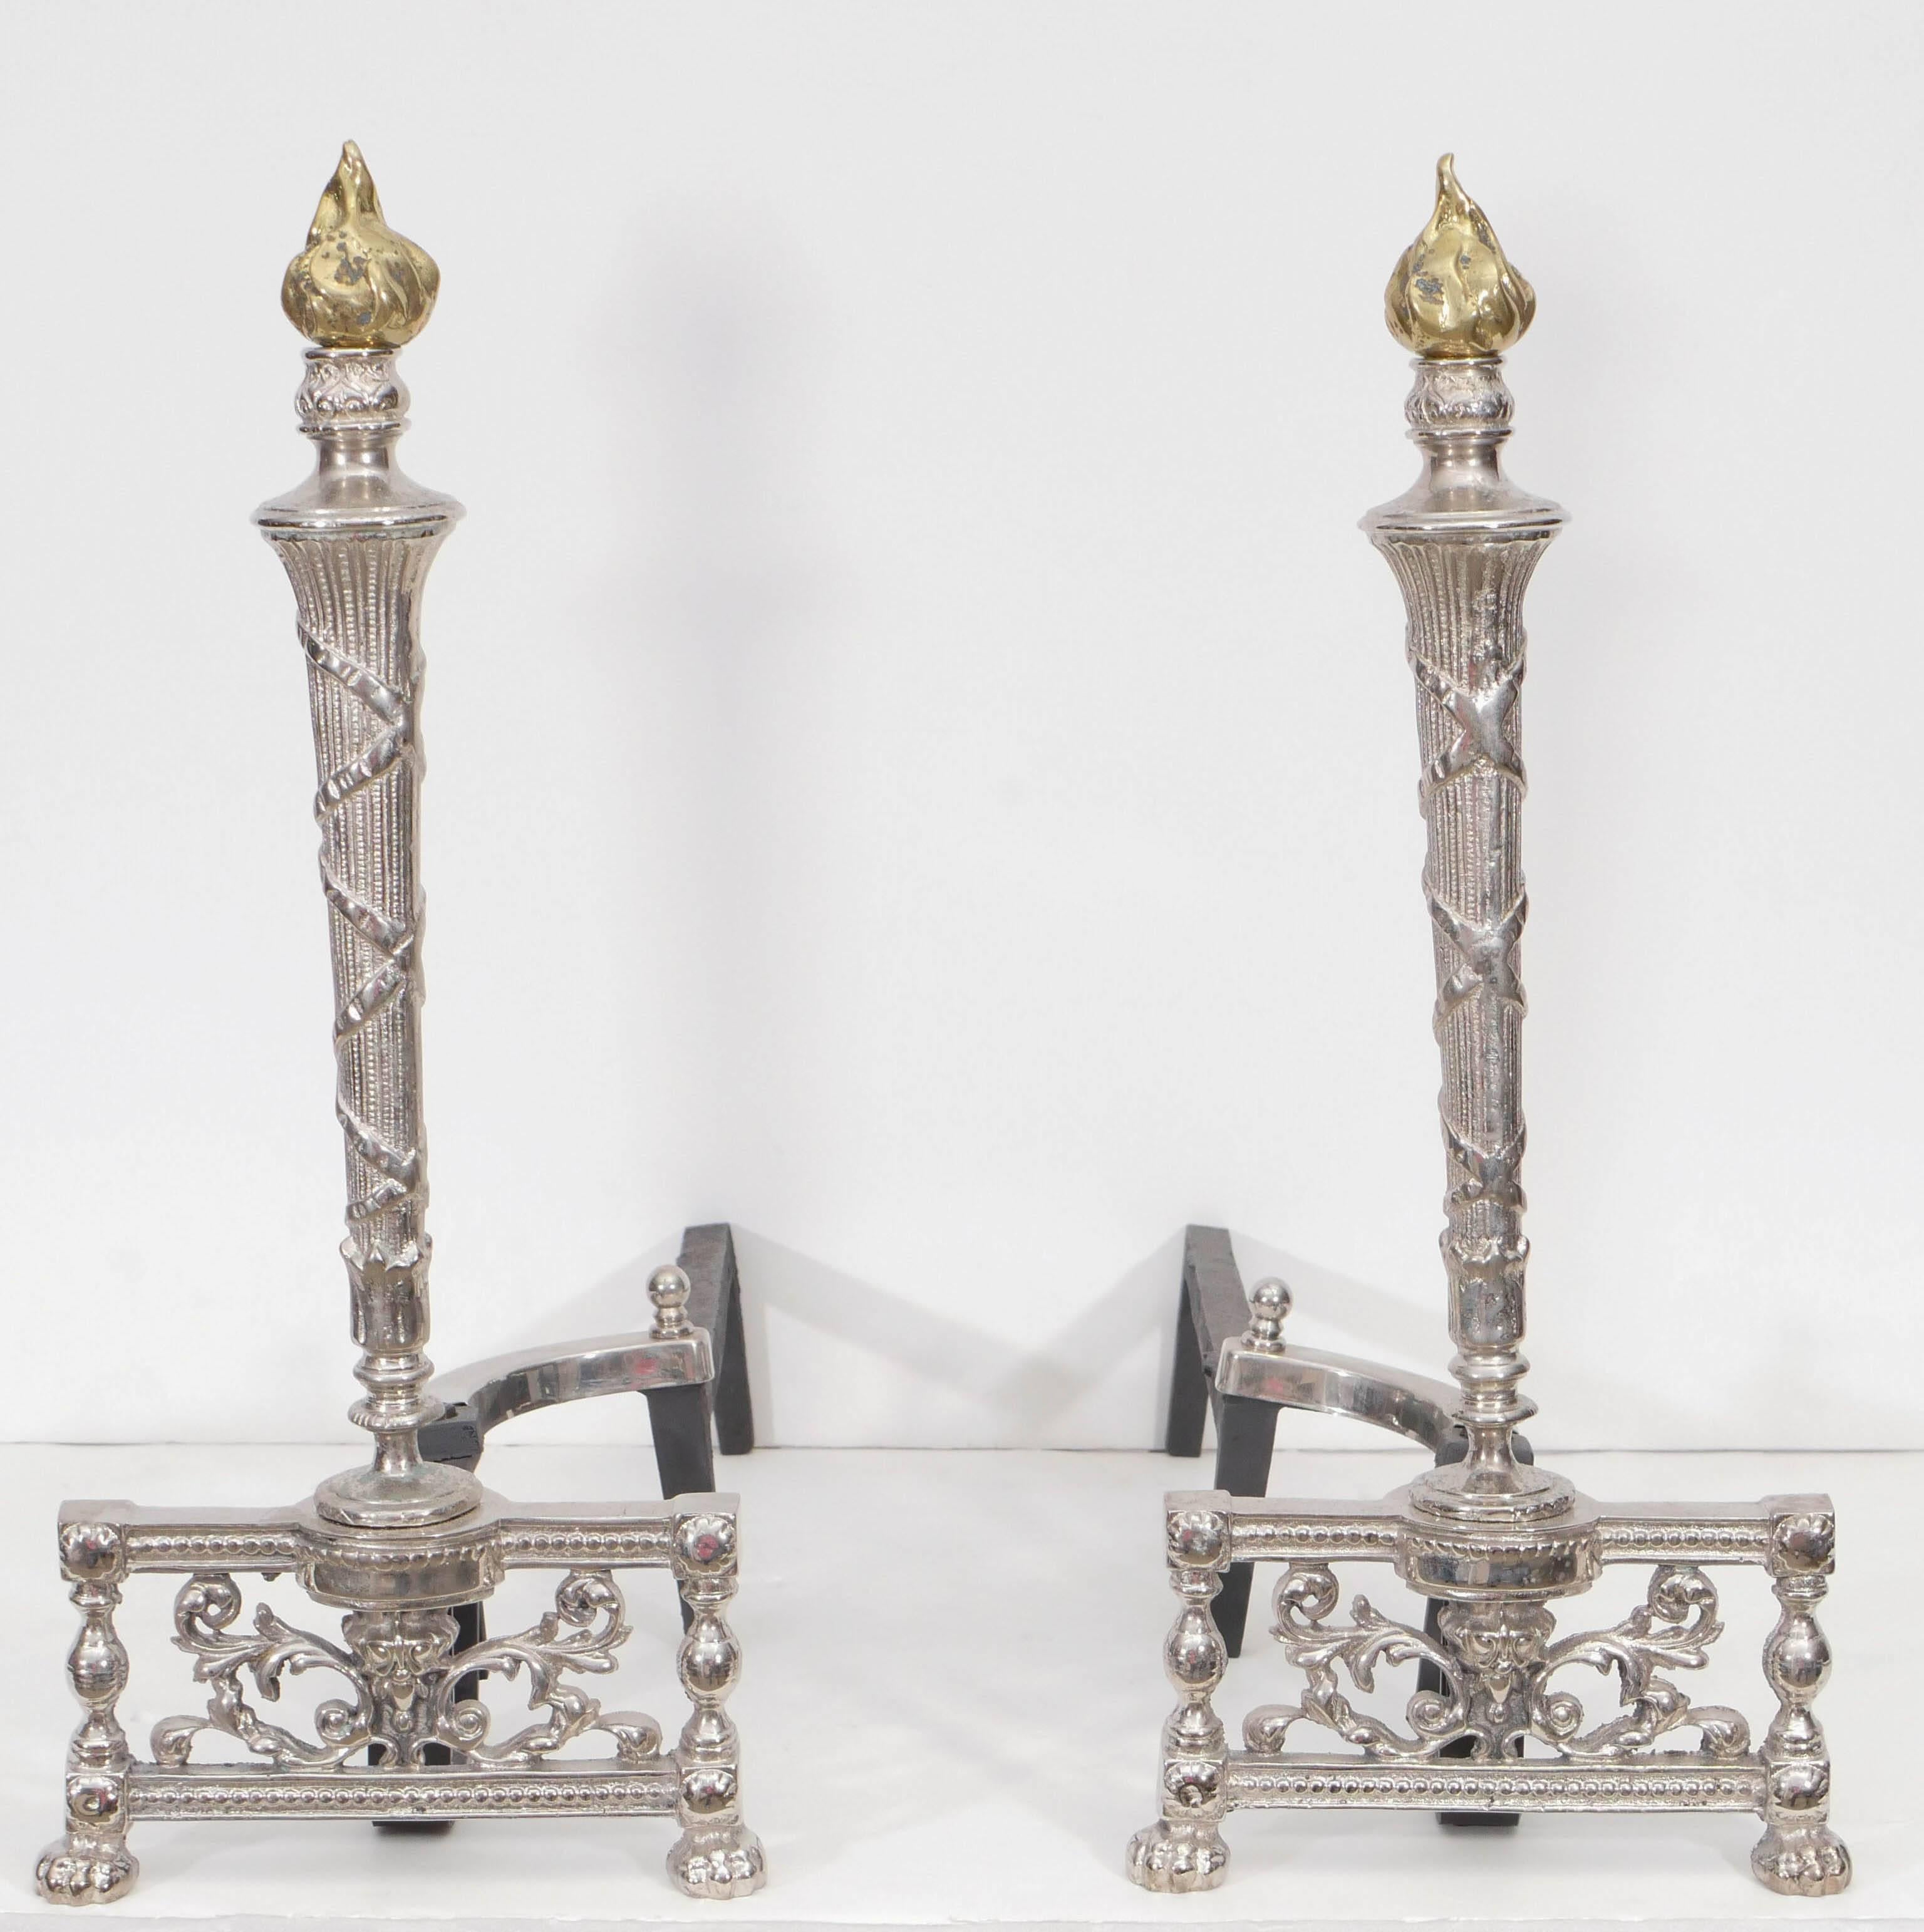 Pair of Art Deco polished nickel andirons with a stylized brass flame finials and cast iron backs.